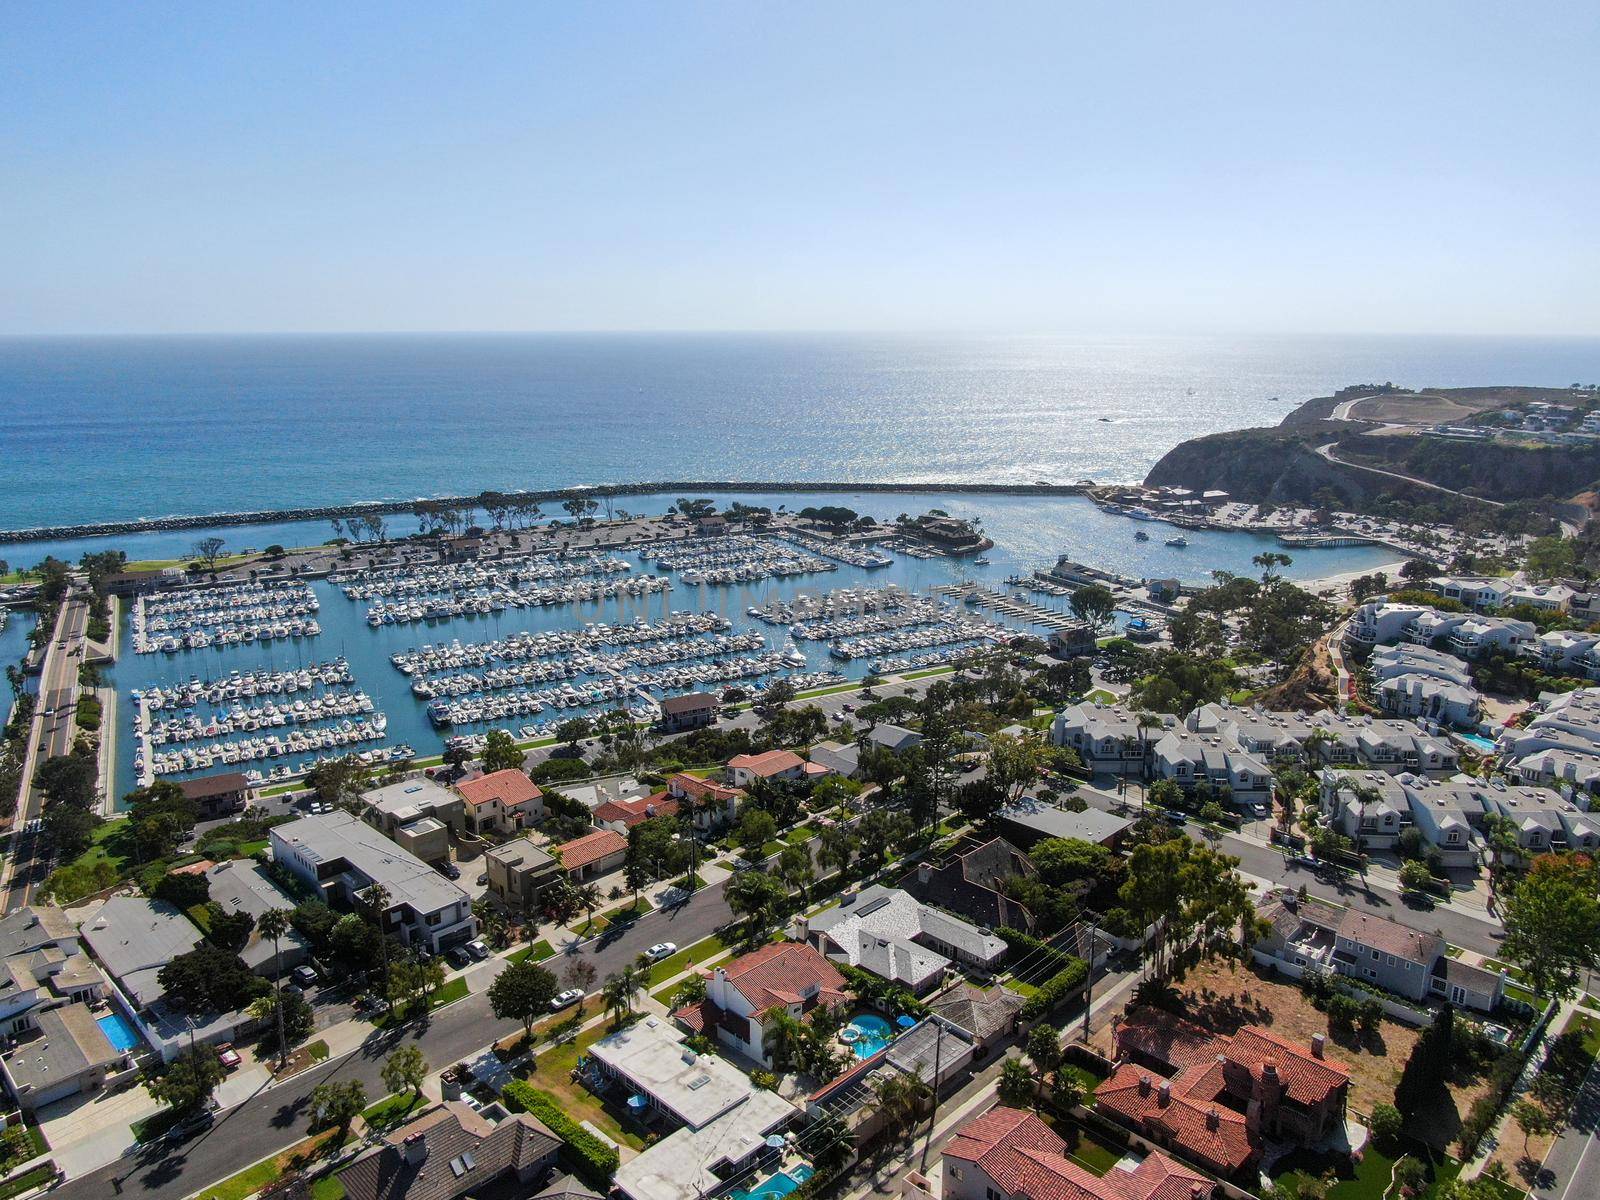 Aerial view of Dana Point Harbor town and beach. Southern Orange County, California. USA